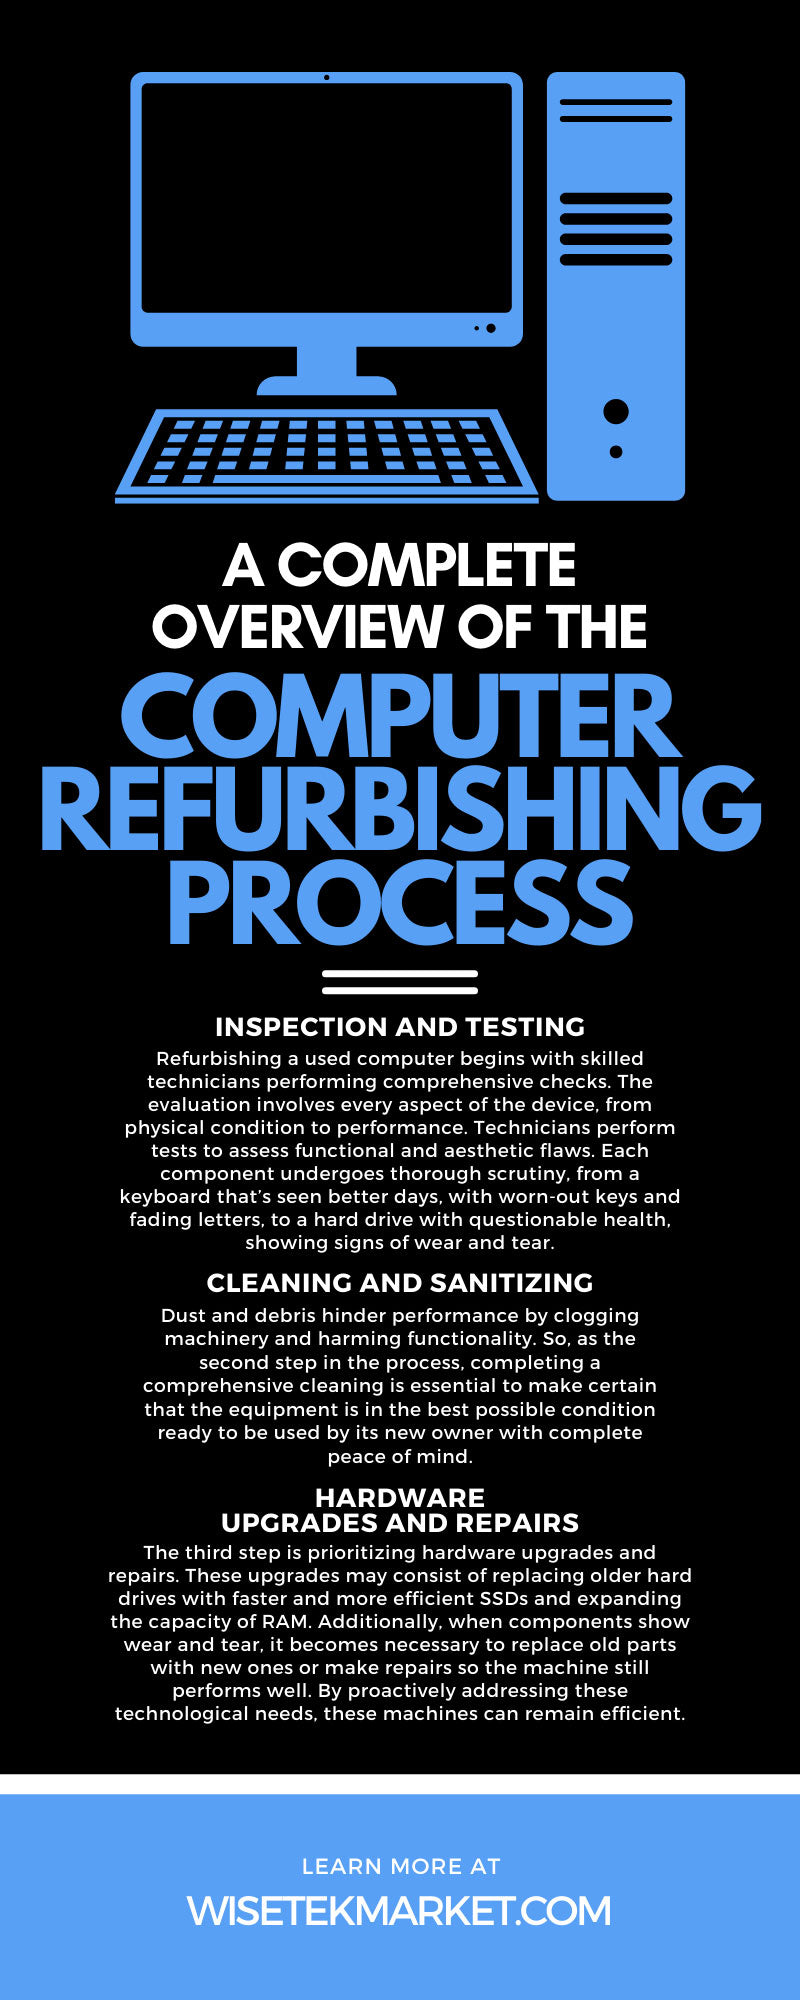 A Complete Overview of the Computer Refurbishing Process